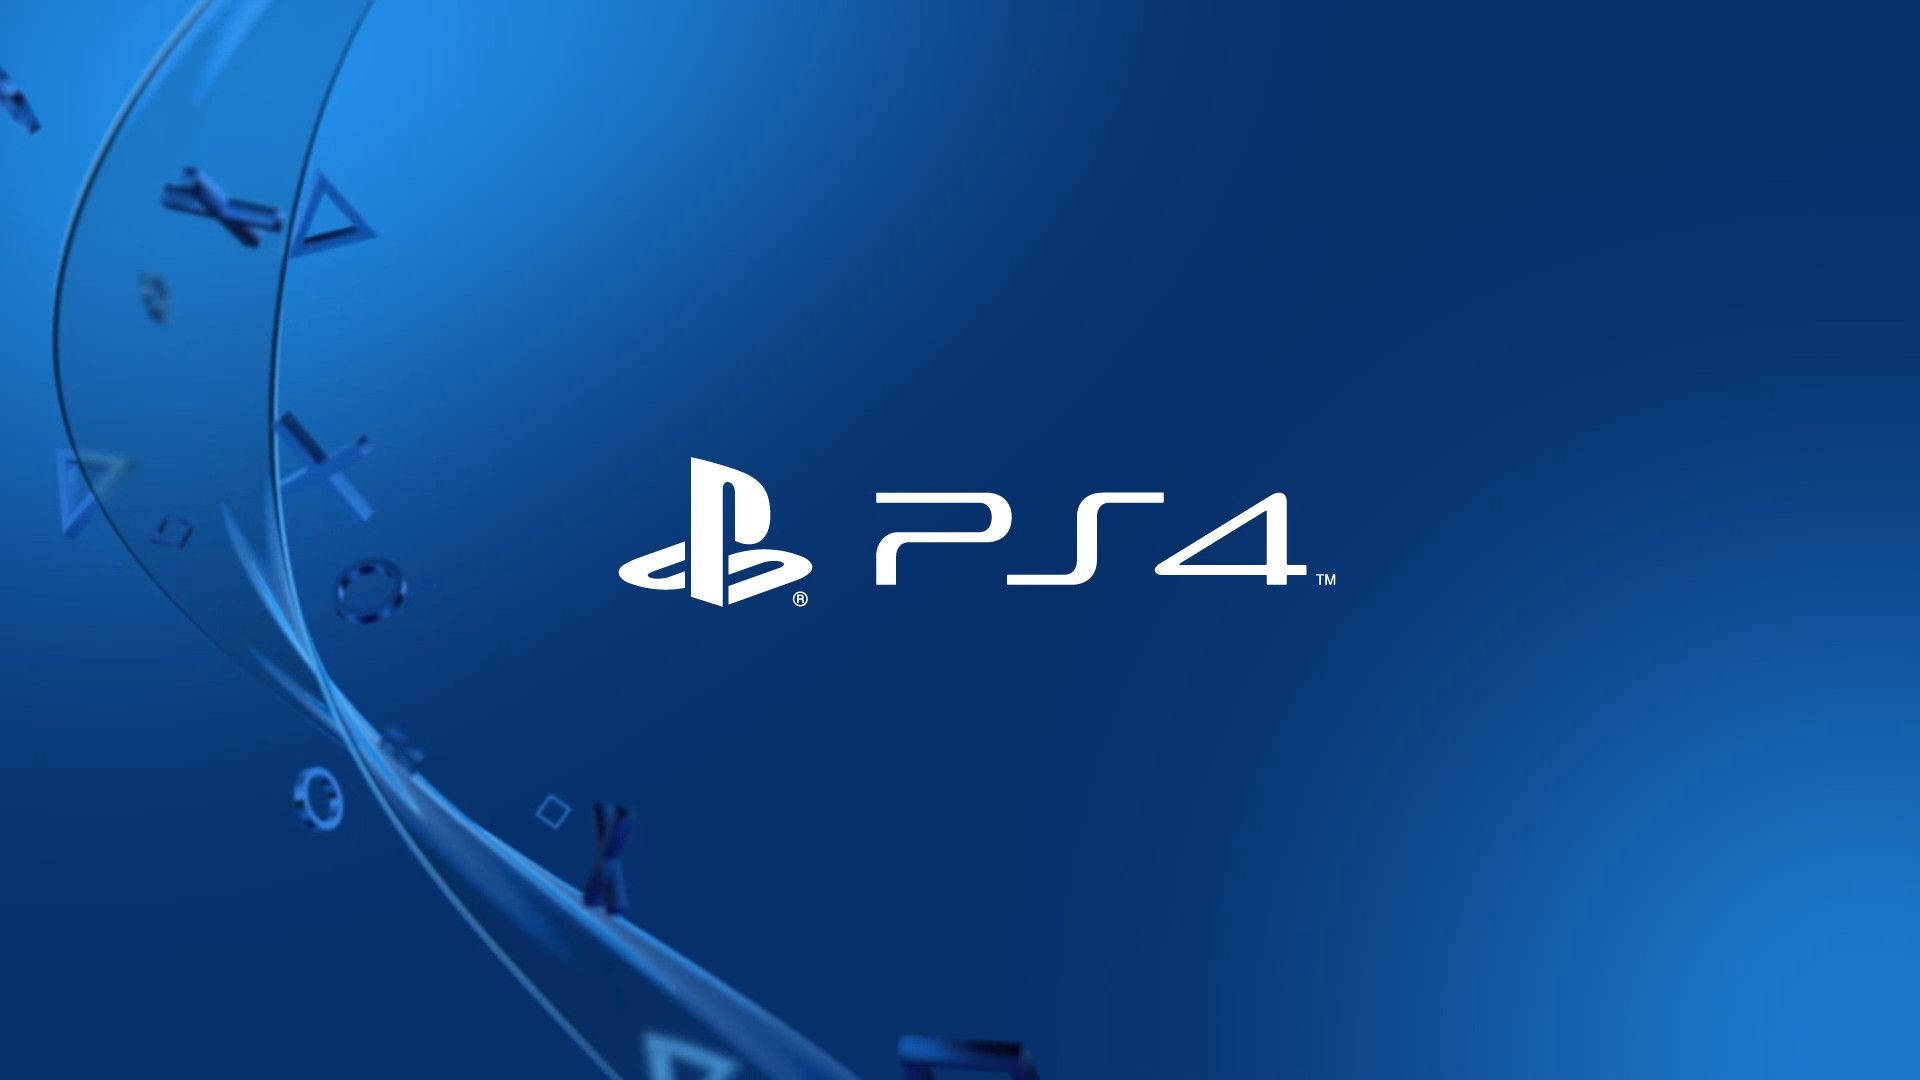 The shining blue abstract design of a Ps4 game console. Wallpaper